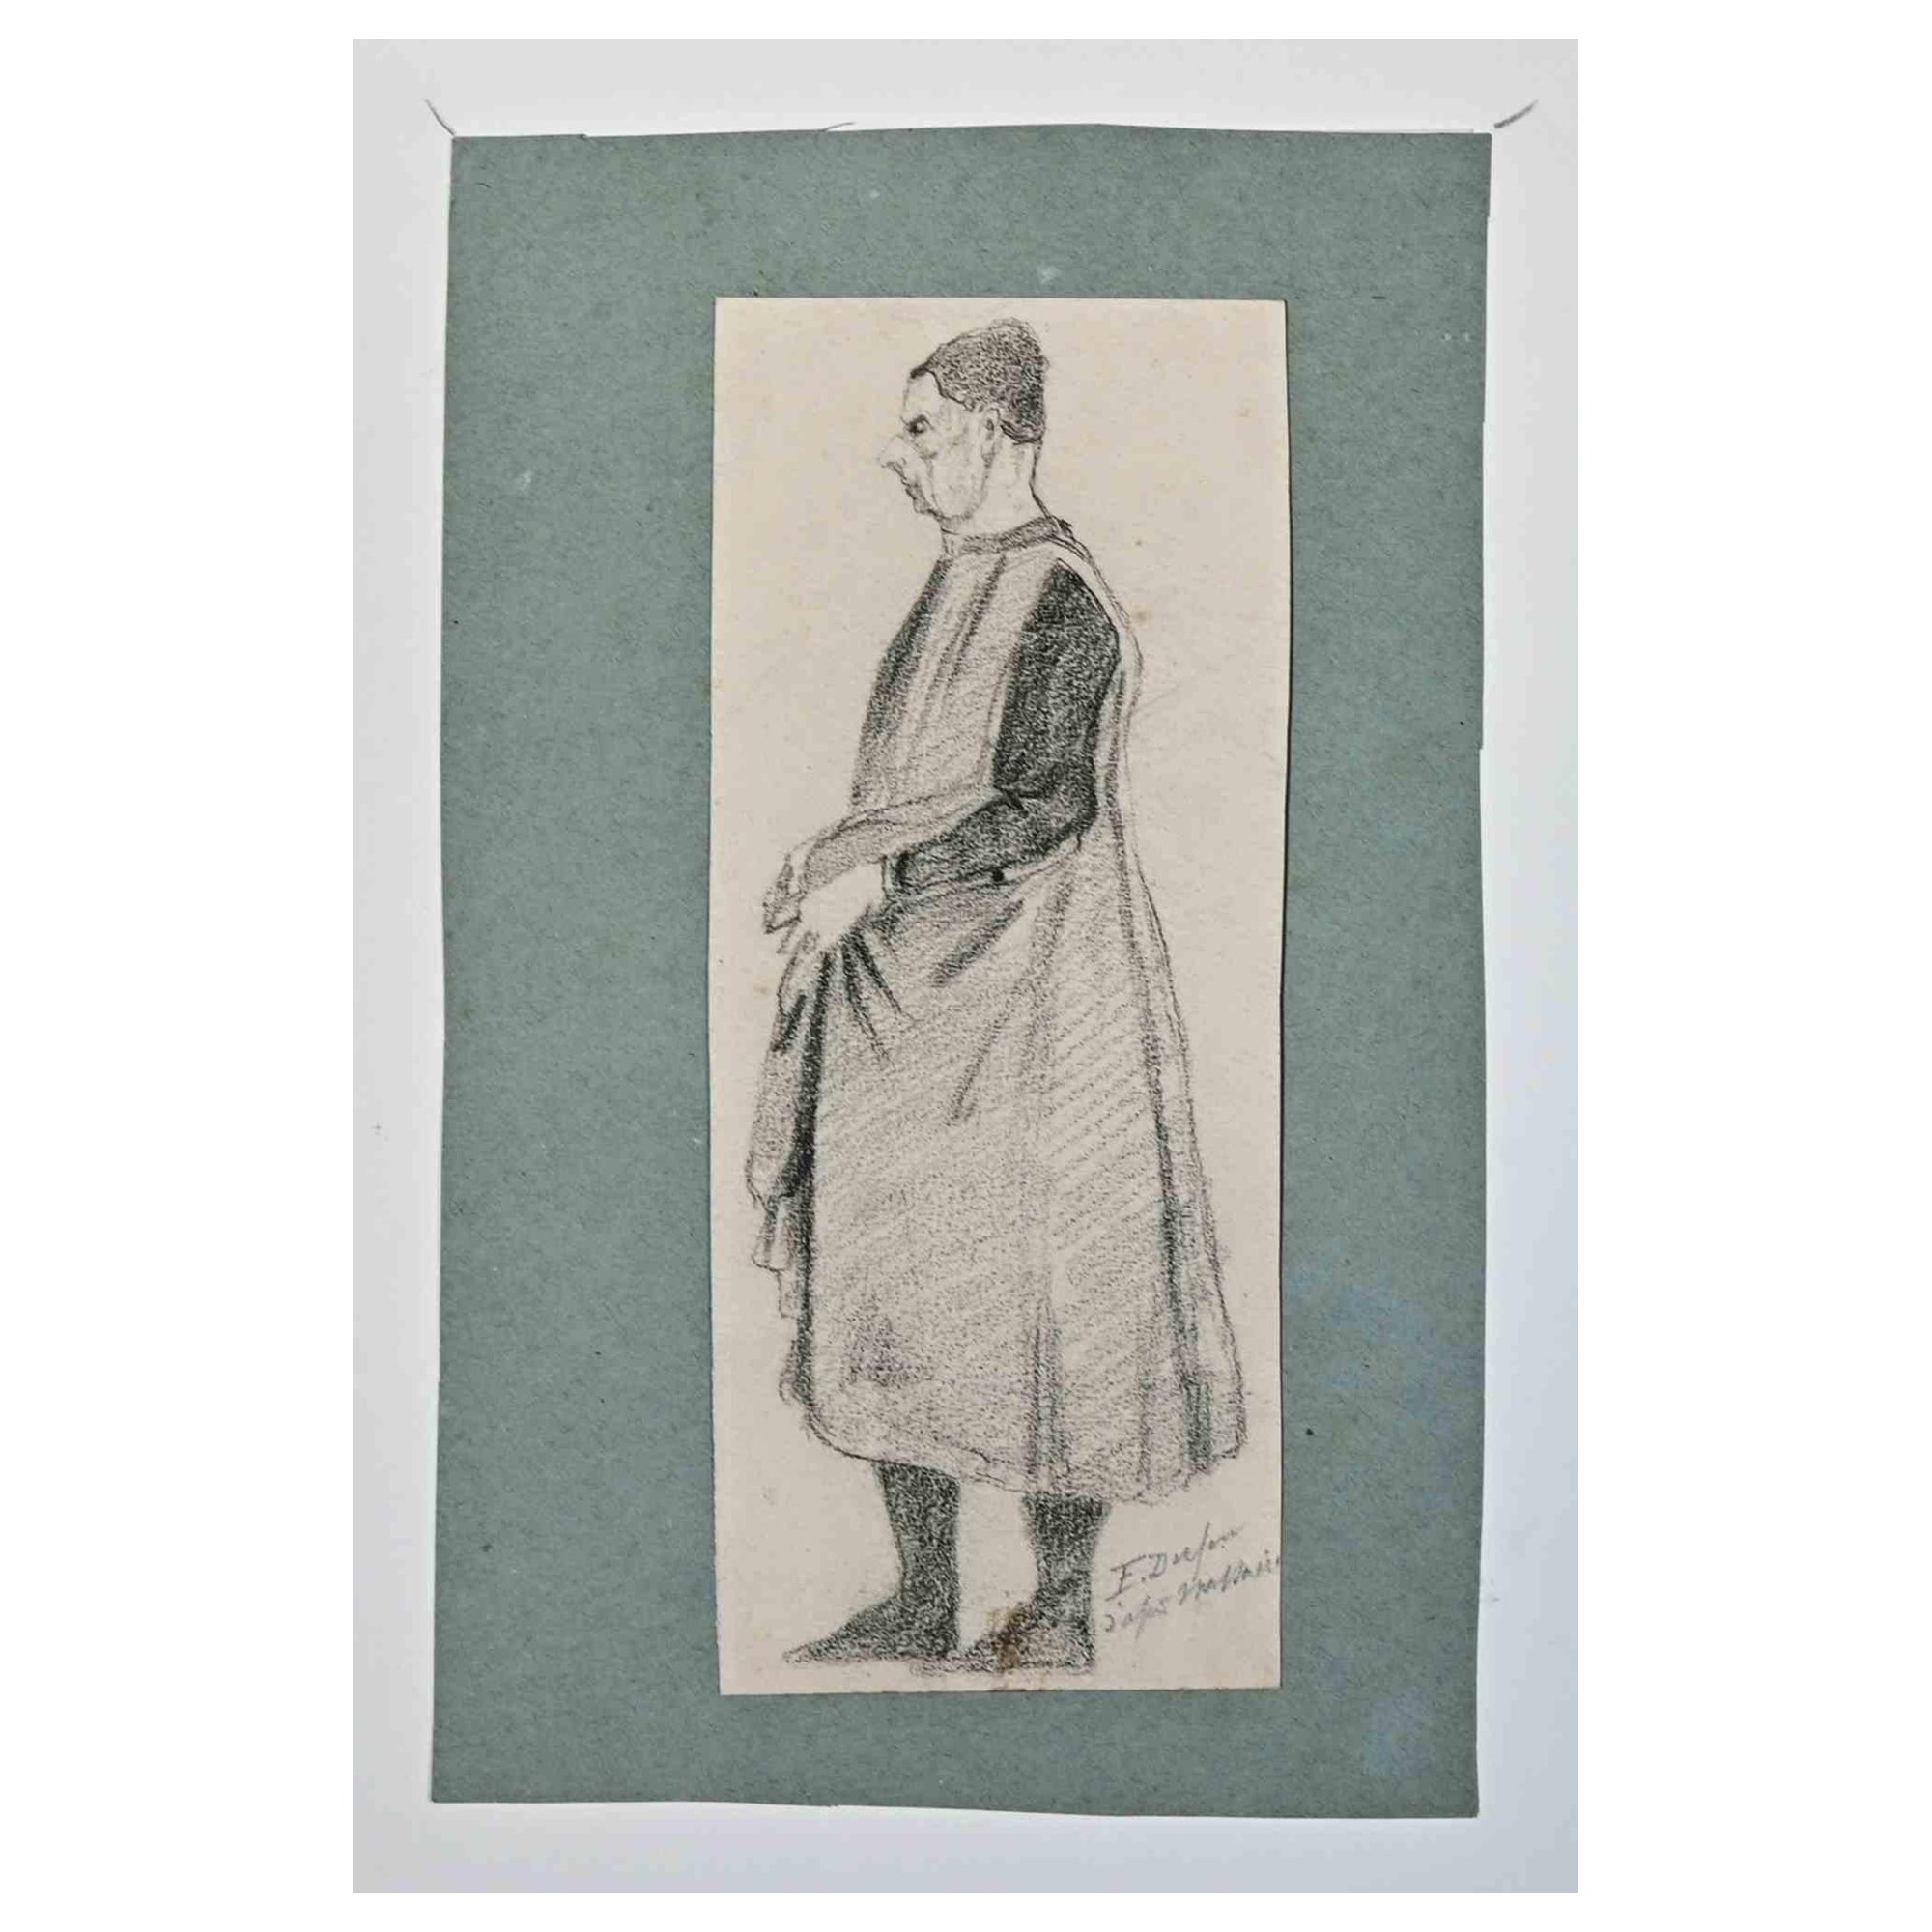 Bishop is an original drawing in pencil on paper realized by Edouard Dufeu in the 1880s.

Hand-signed on the lower. 

Included a white Passepartout: 37 x30 cm

Good conditions.

The artwork is represented through deft strokes in a well-balanced